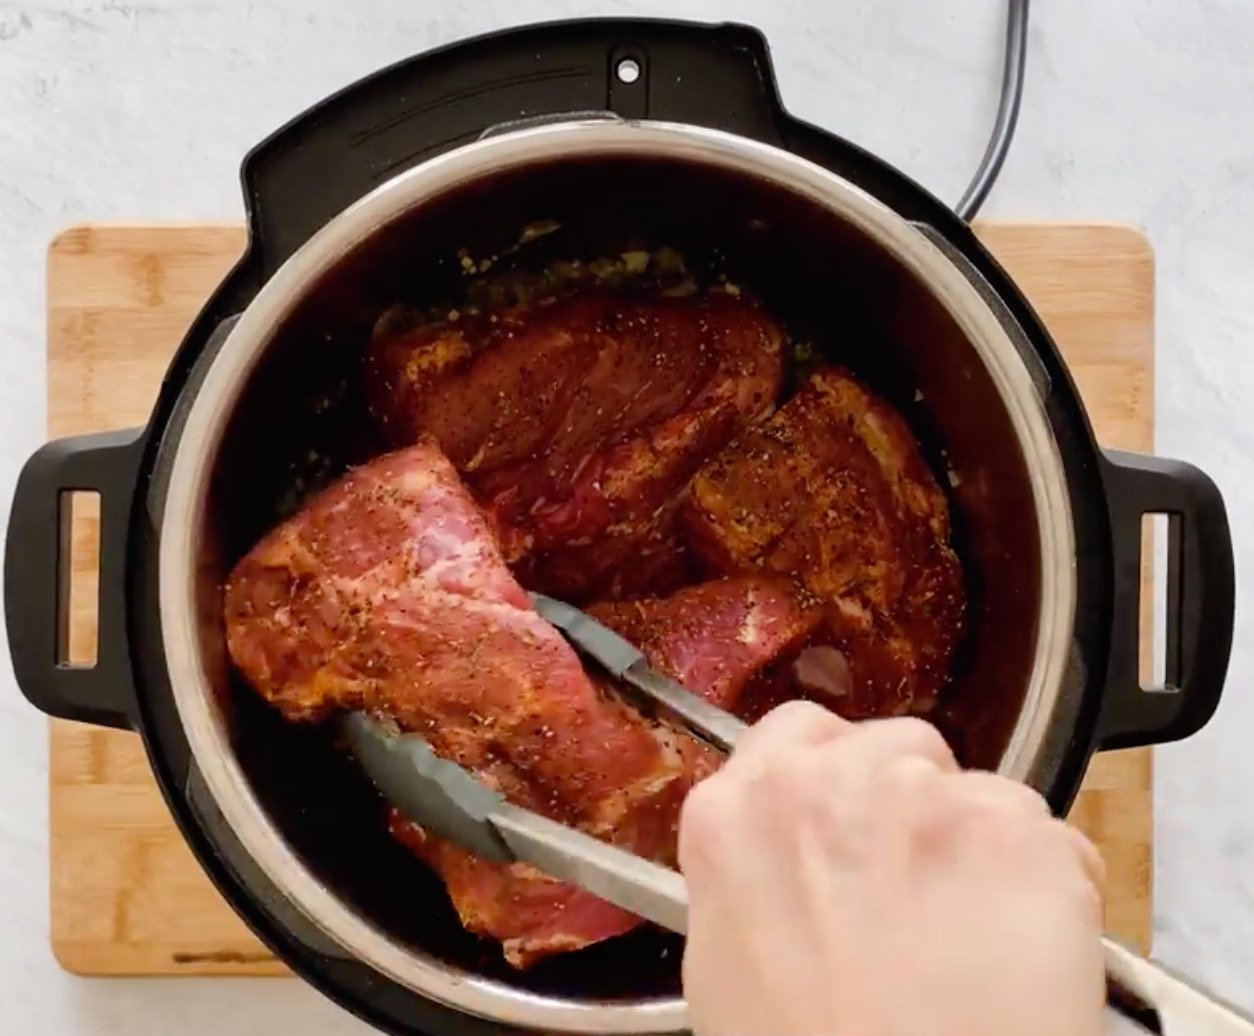 Meat cut into smaller pieces to cook in the Instant Pot.